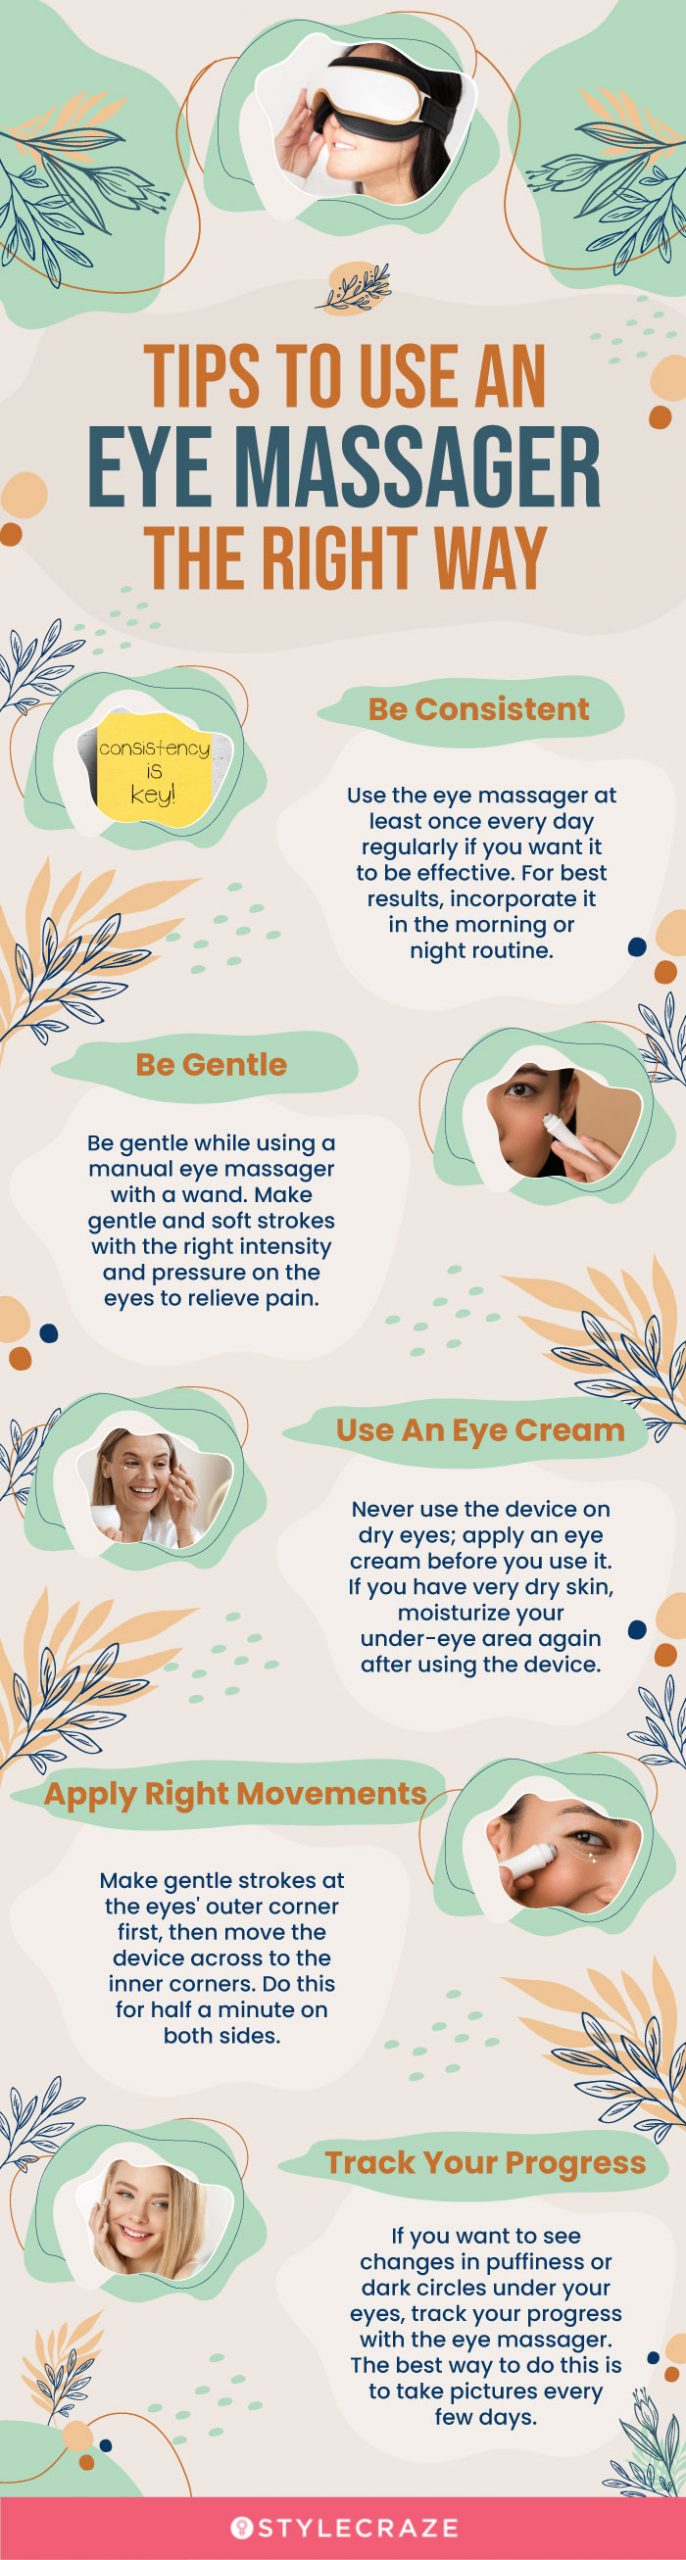 Tips To Use An Eye Massager The Right Way [infographic]